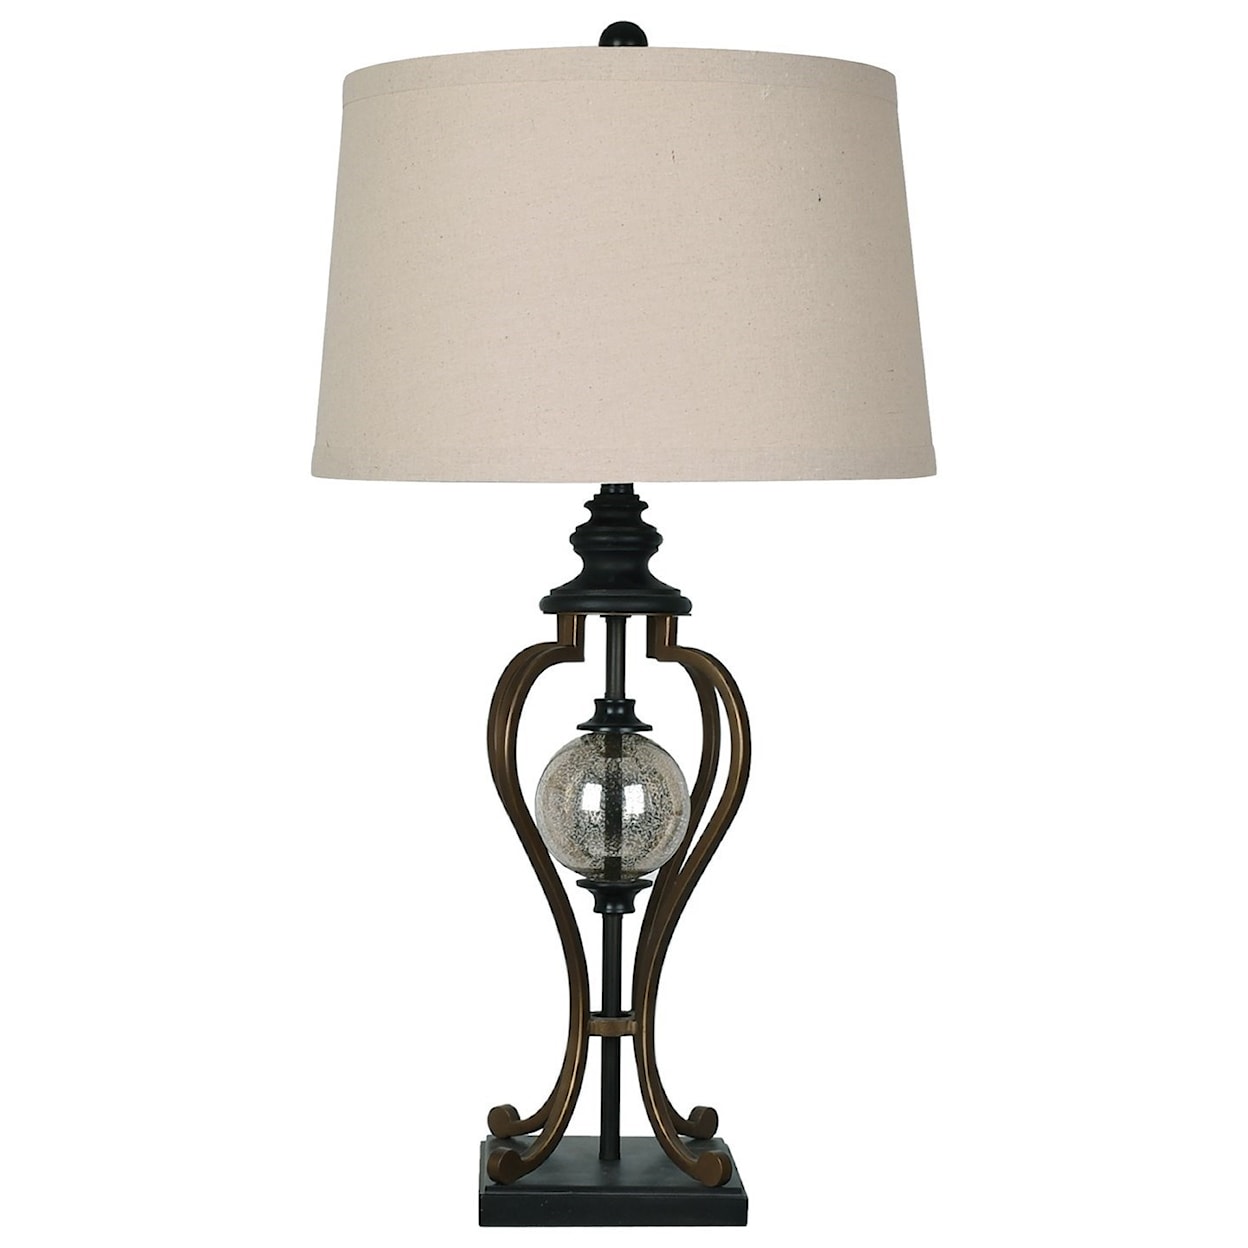 Crestview Collection Lighting Whitby Table Lamp